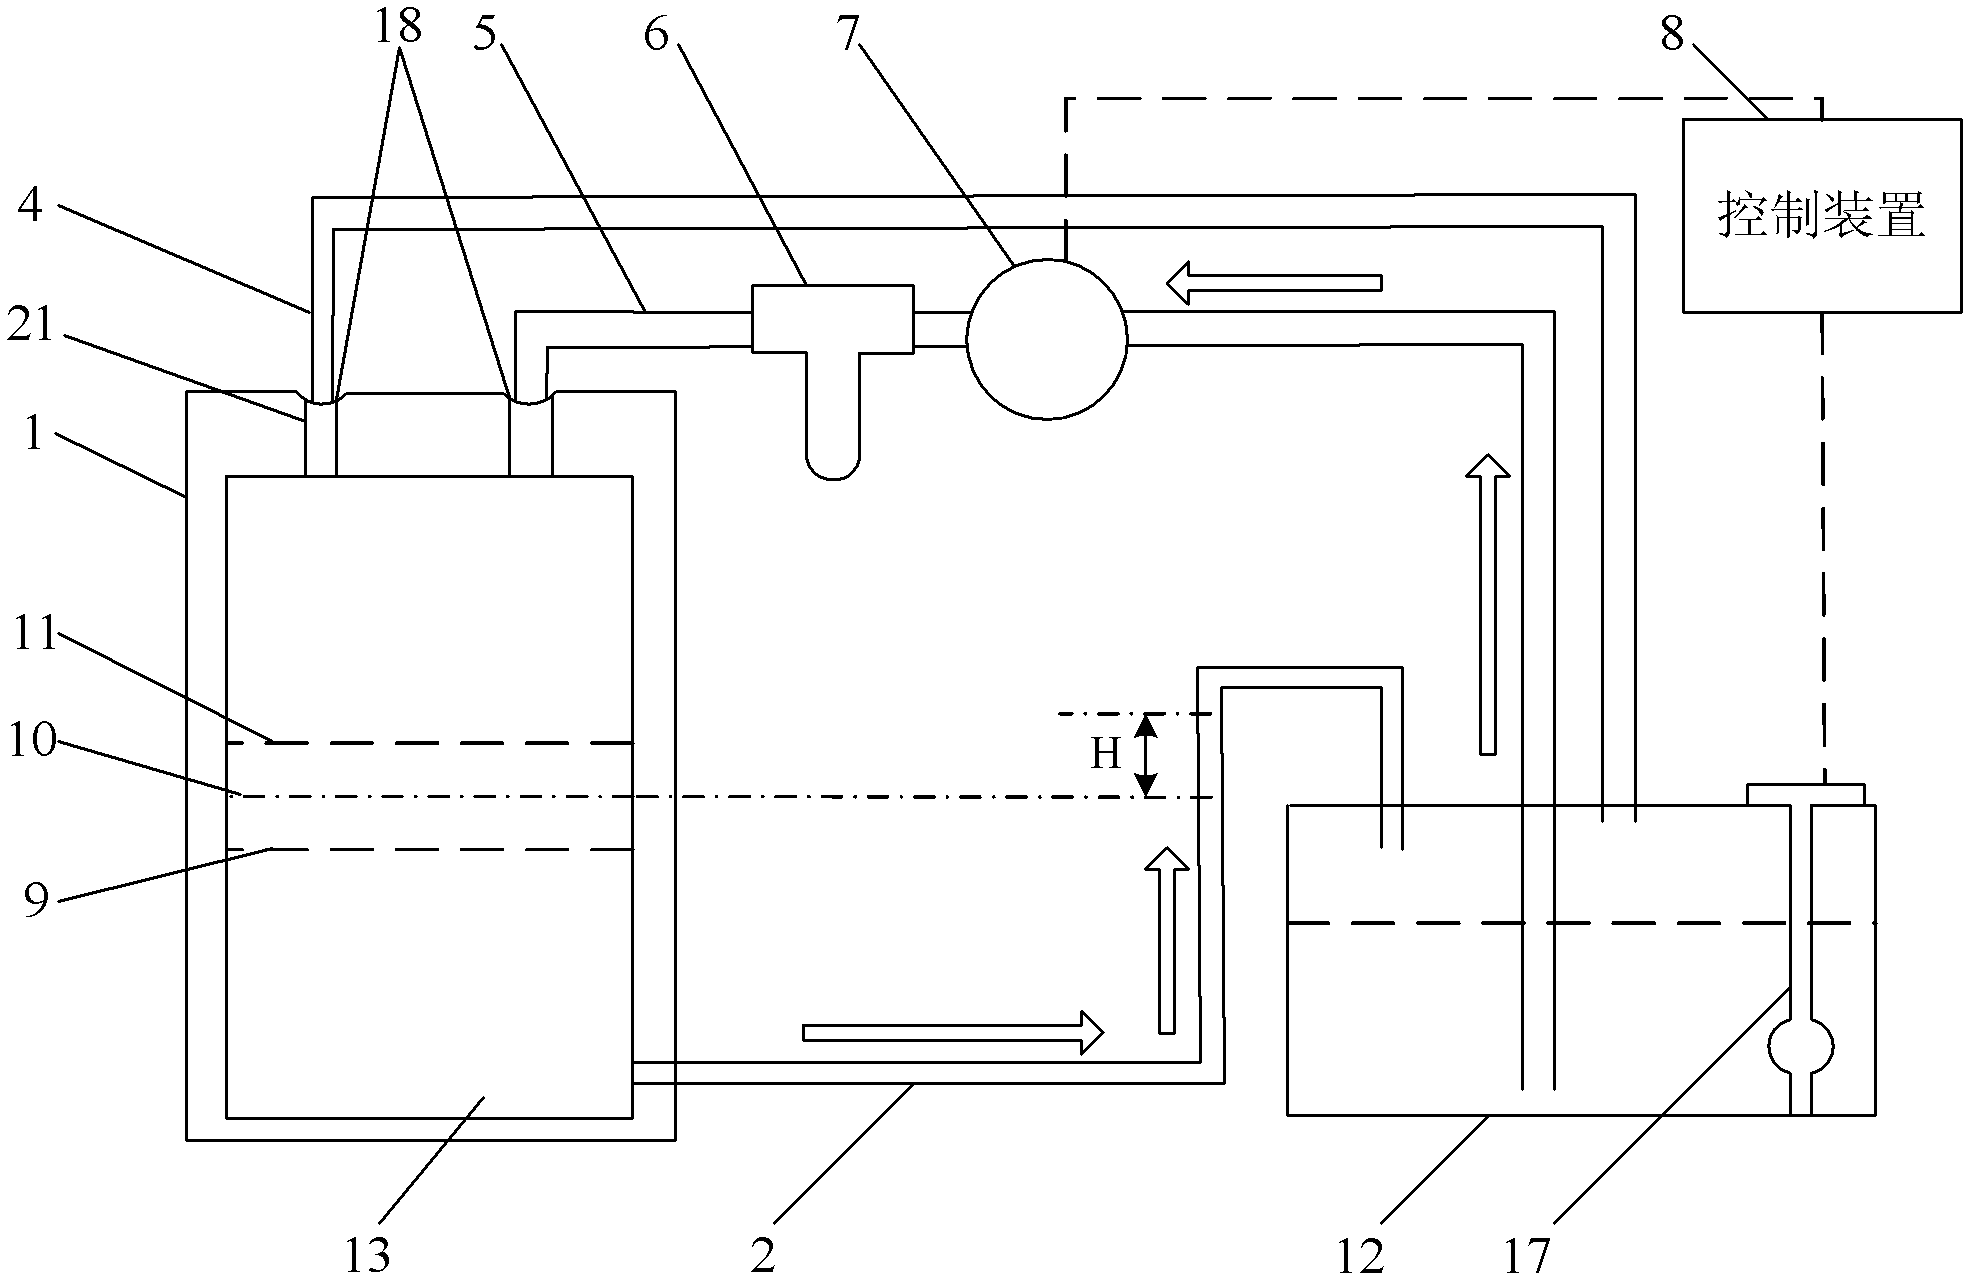 Automatic machine oil cleaning system, oil return pipeline of communicating vessel, and engine system